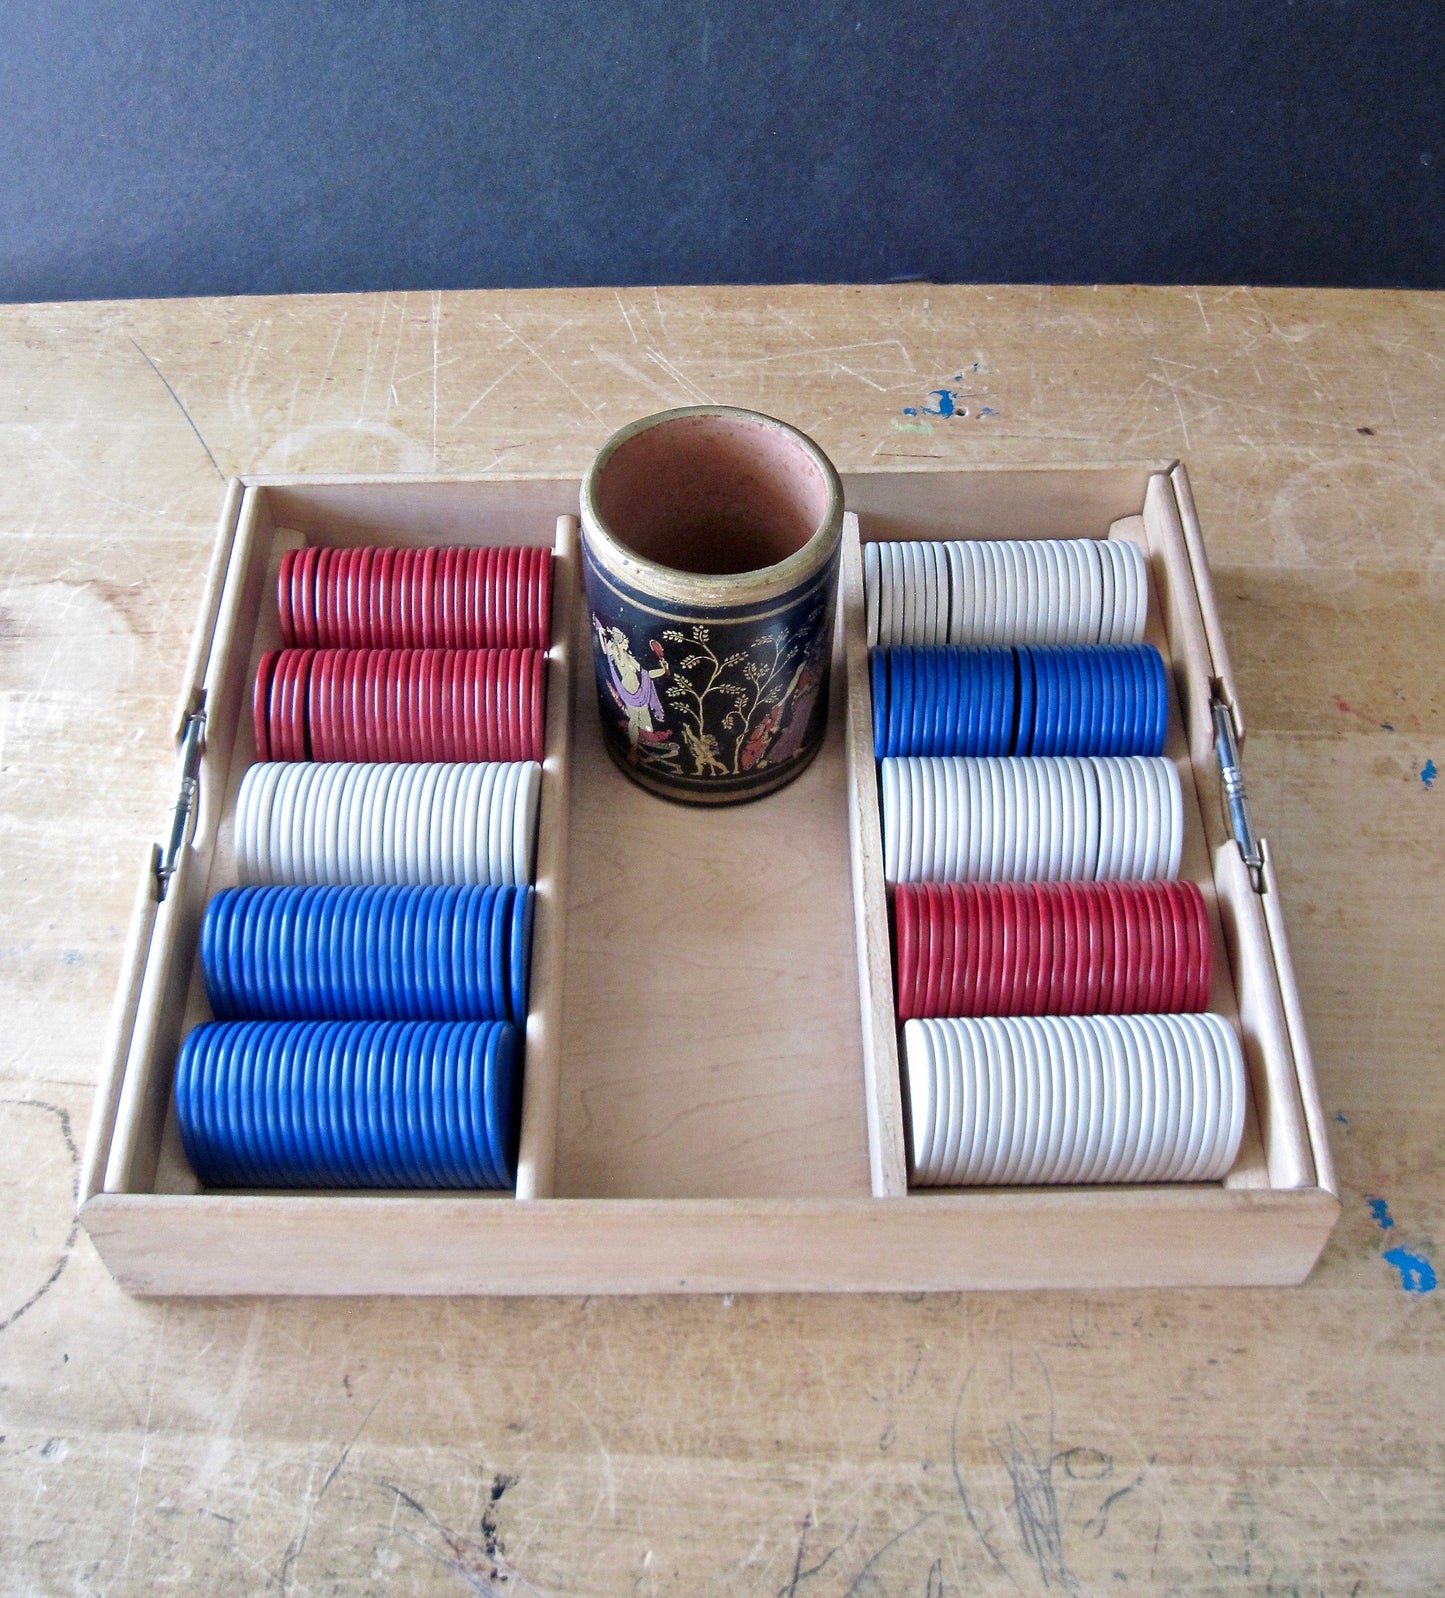 Vintage Game Board Set for Poker, Backgammon, Checkers, Chess